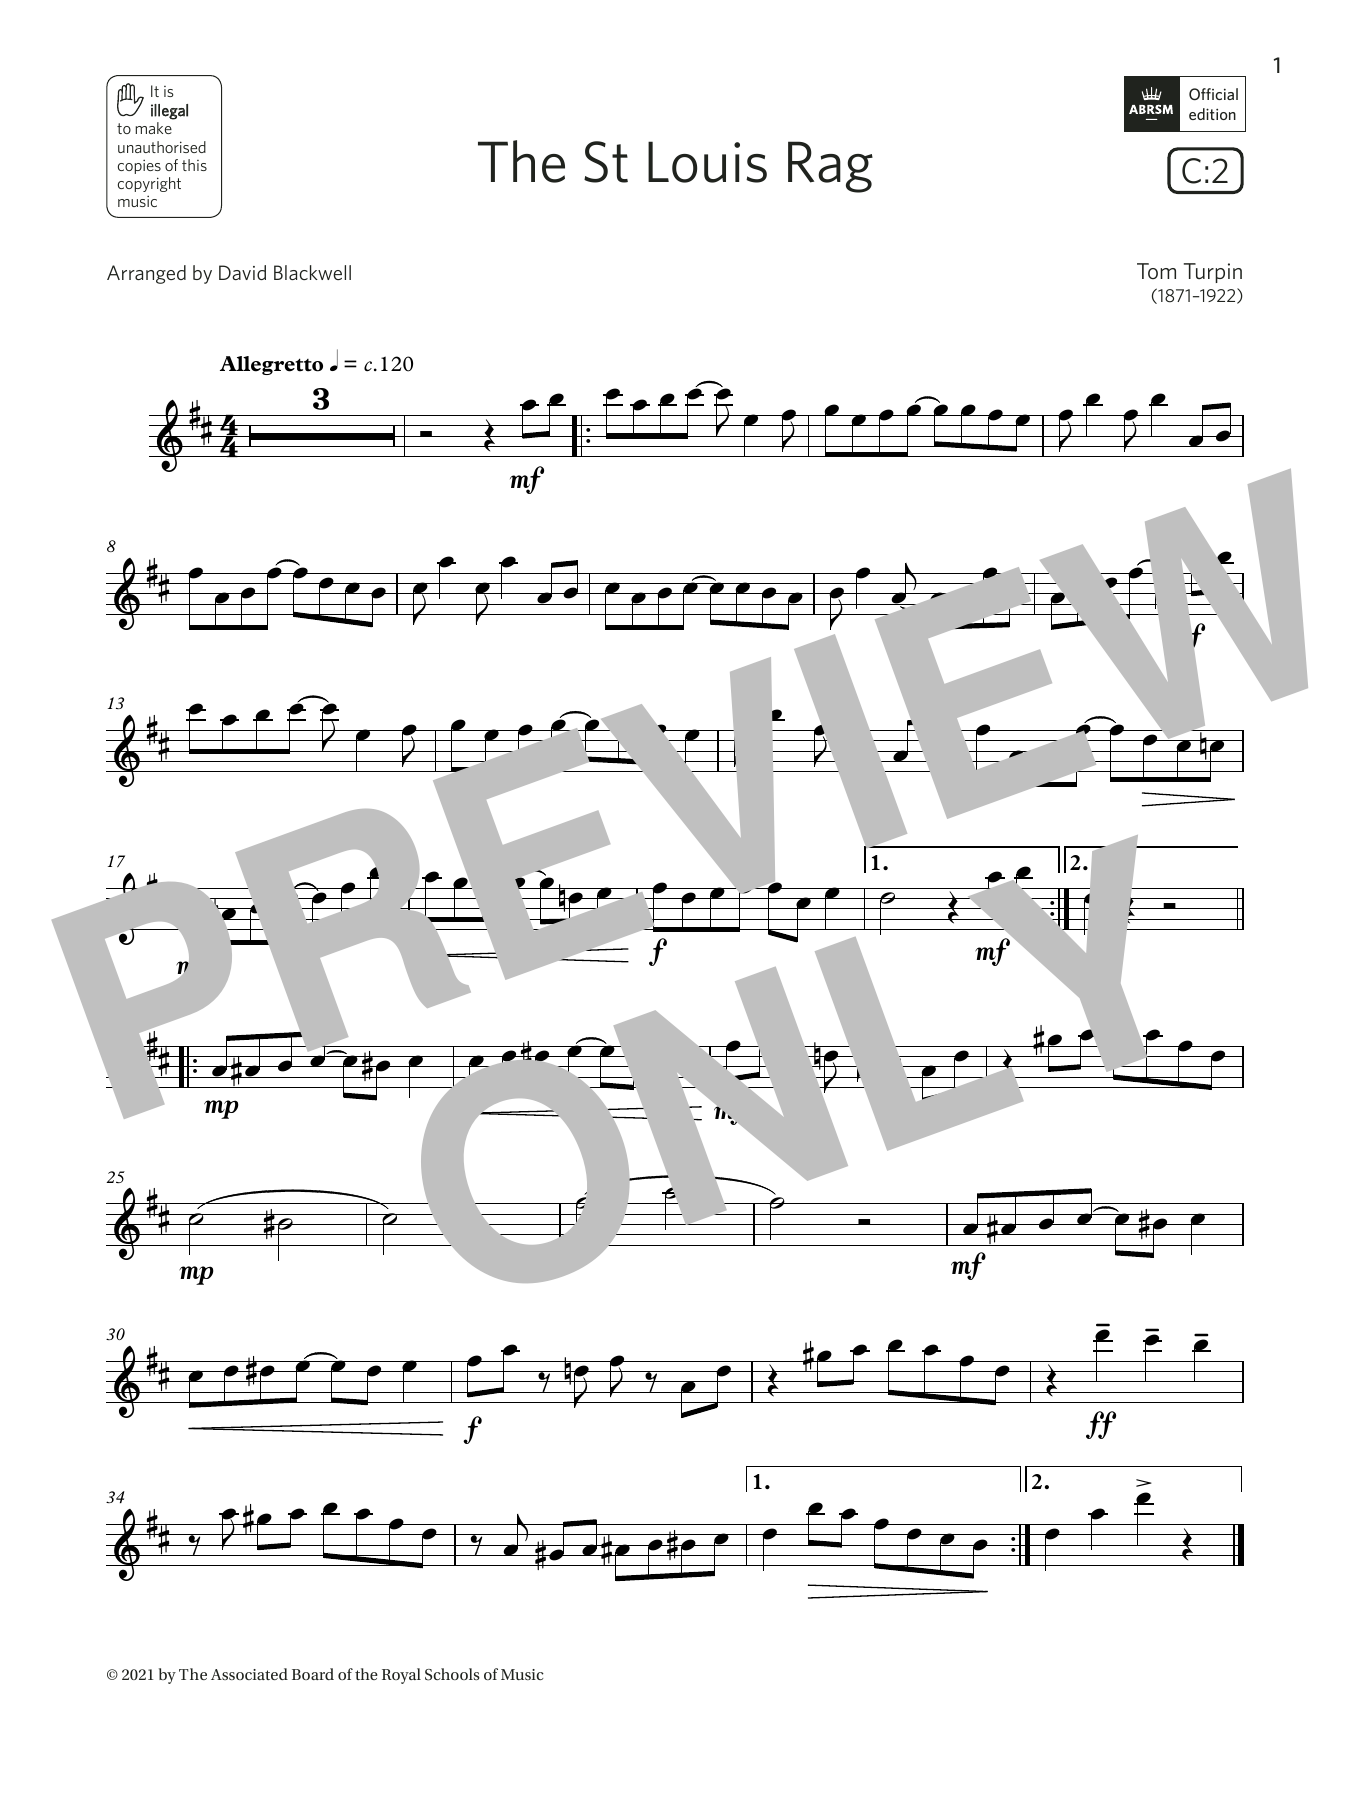 Download Tom Turpin The St Louis Rag (Grade 3 List C2 from Sheet Music